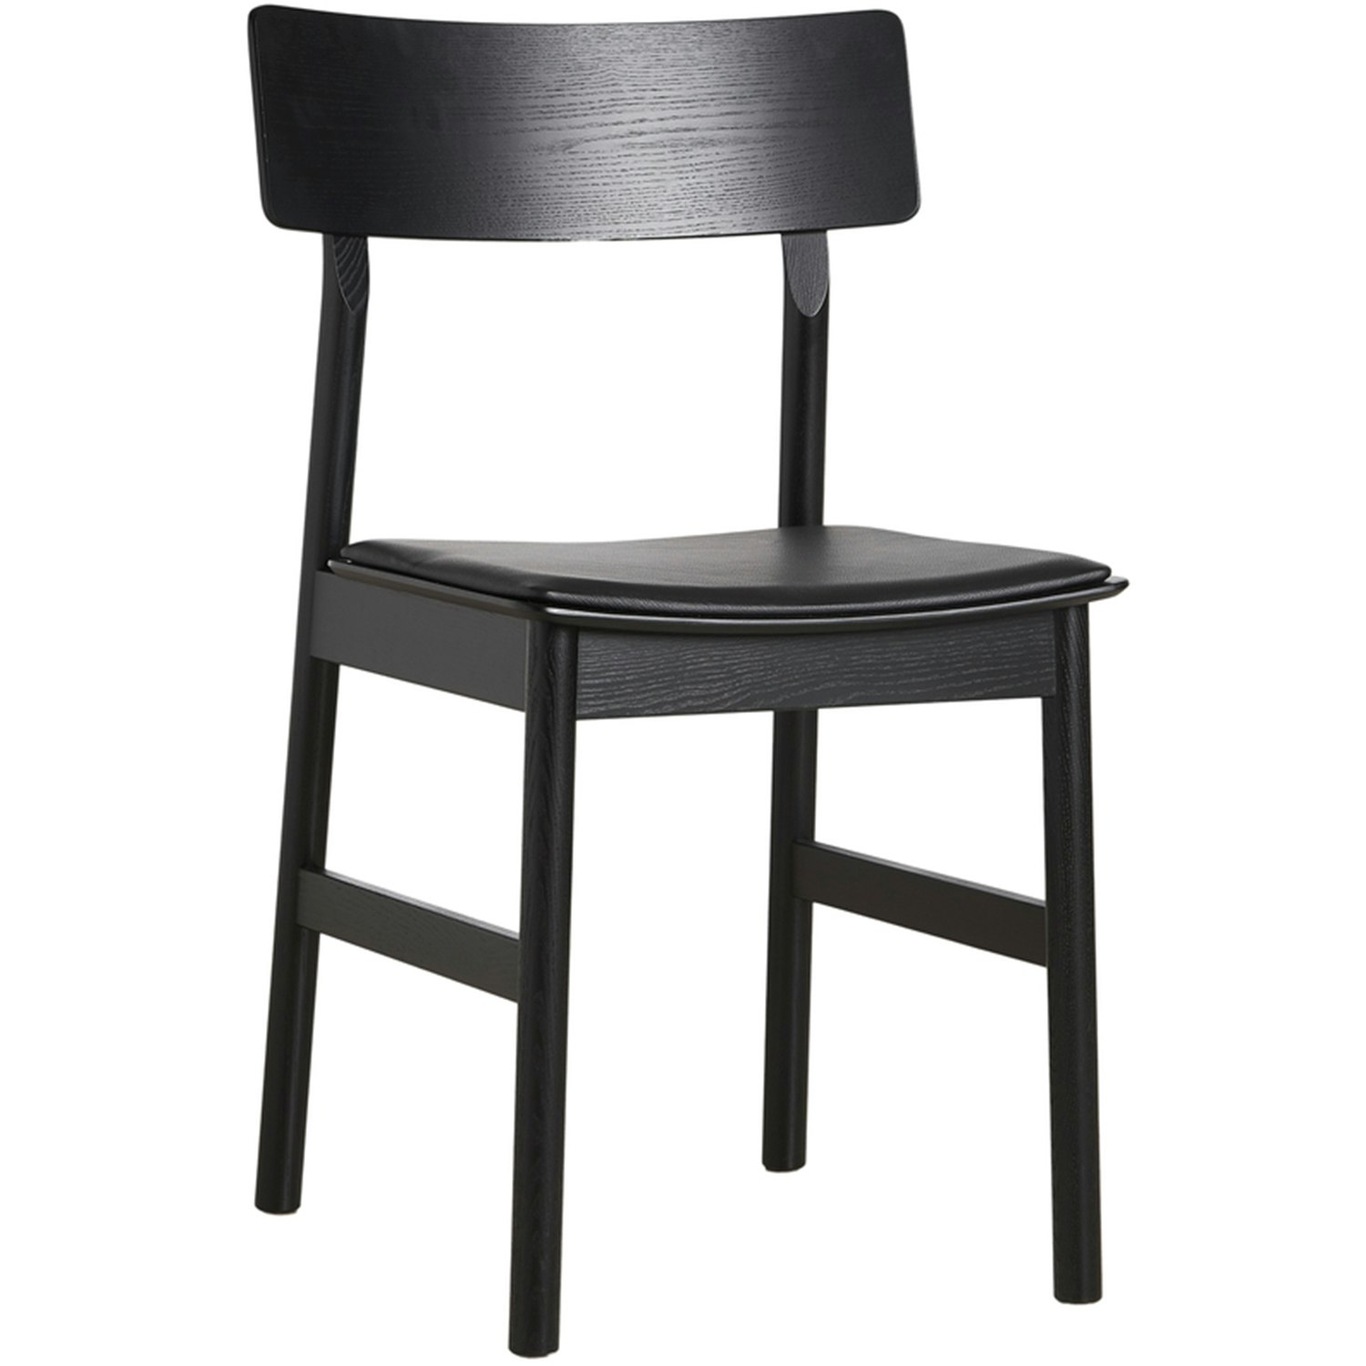 Pause 2.0 Dining Chair, Black Leather / Black Painted Ash